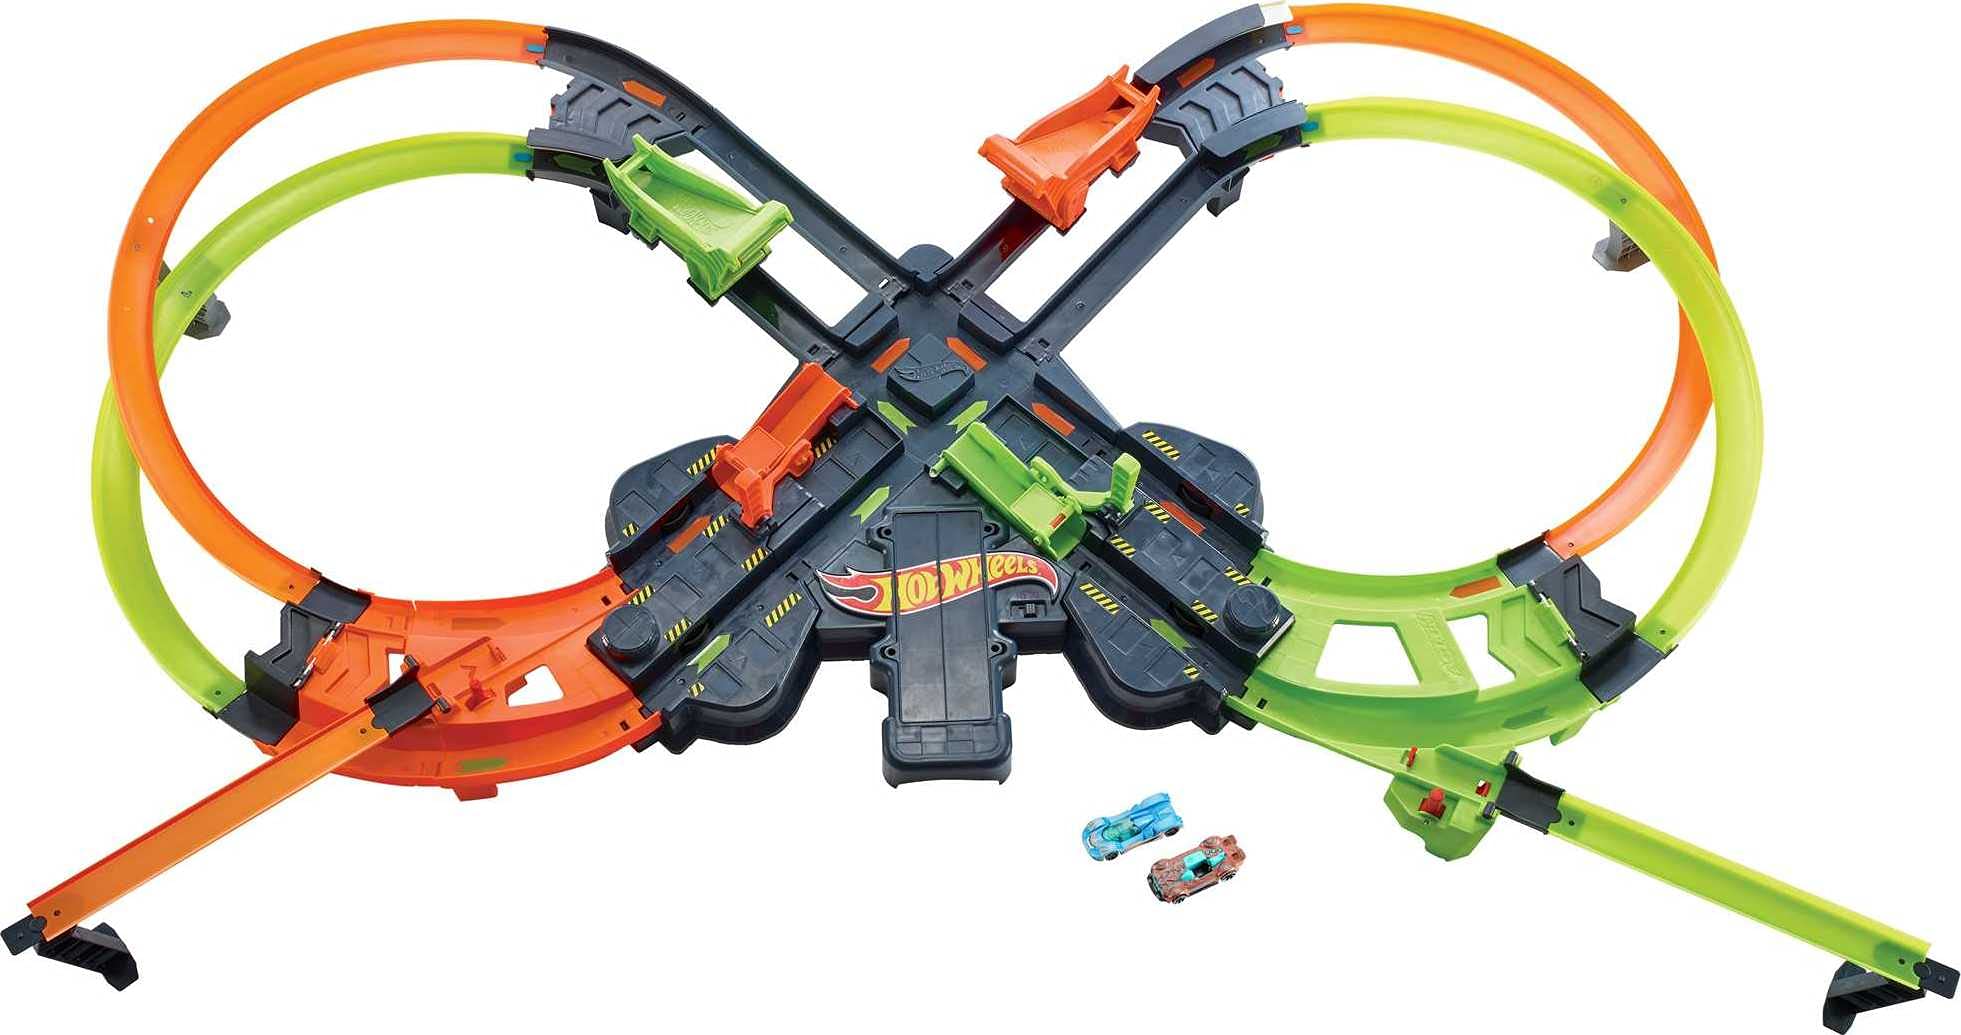 5' Wide Hot Wheels Colossal Crash Double Figure-Eight Track Set w/ Motorized Boosters & 2 Cars $45.72 + Free Shipping